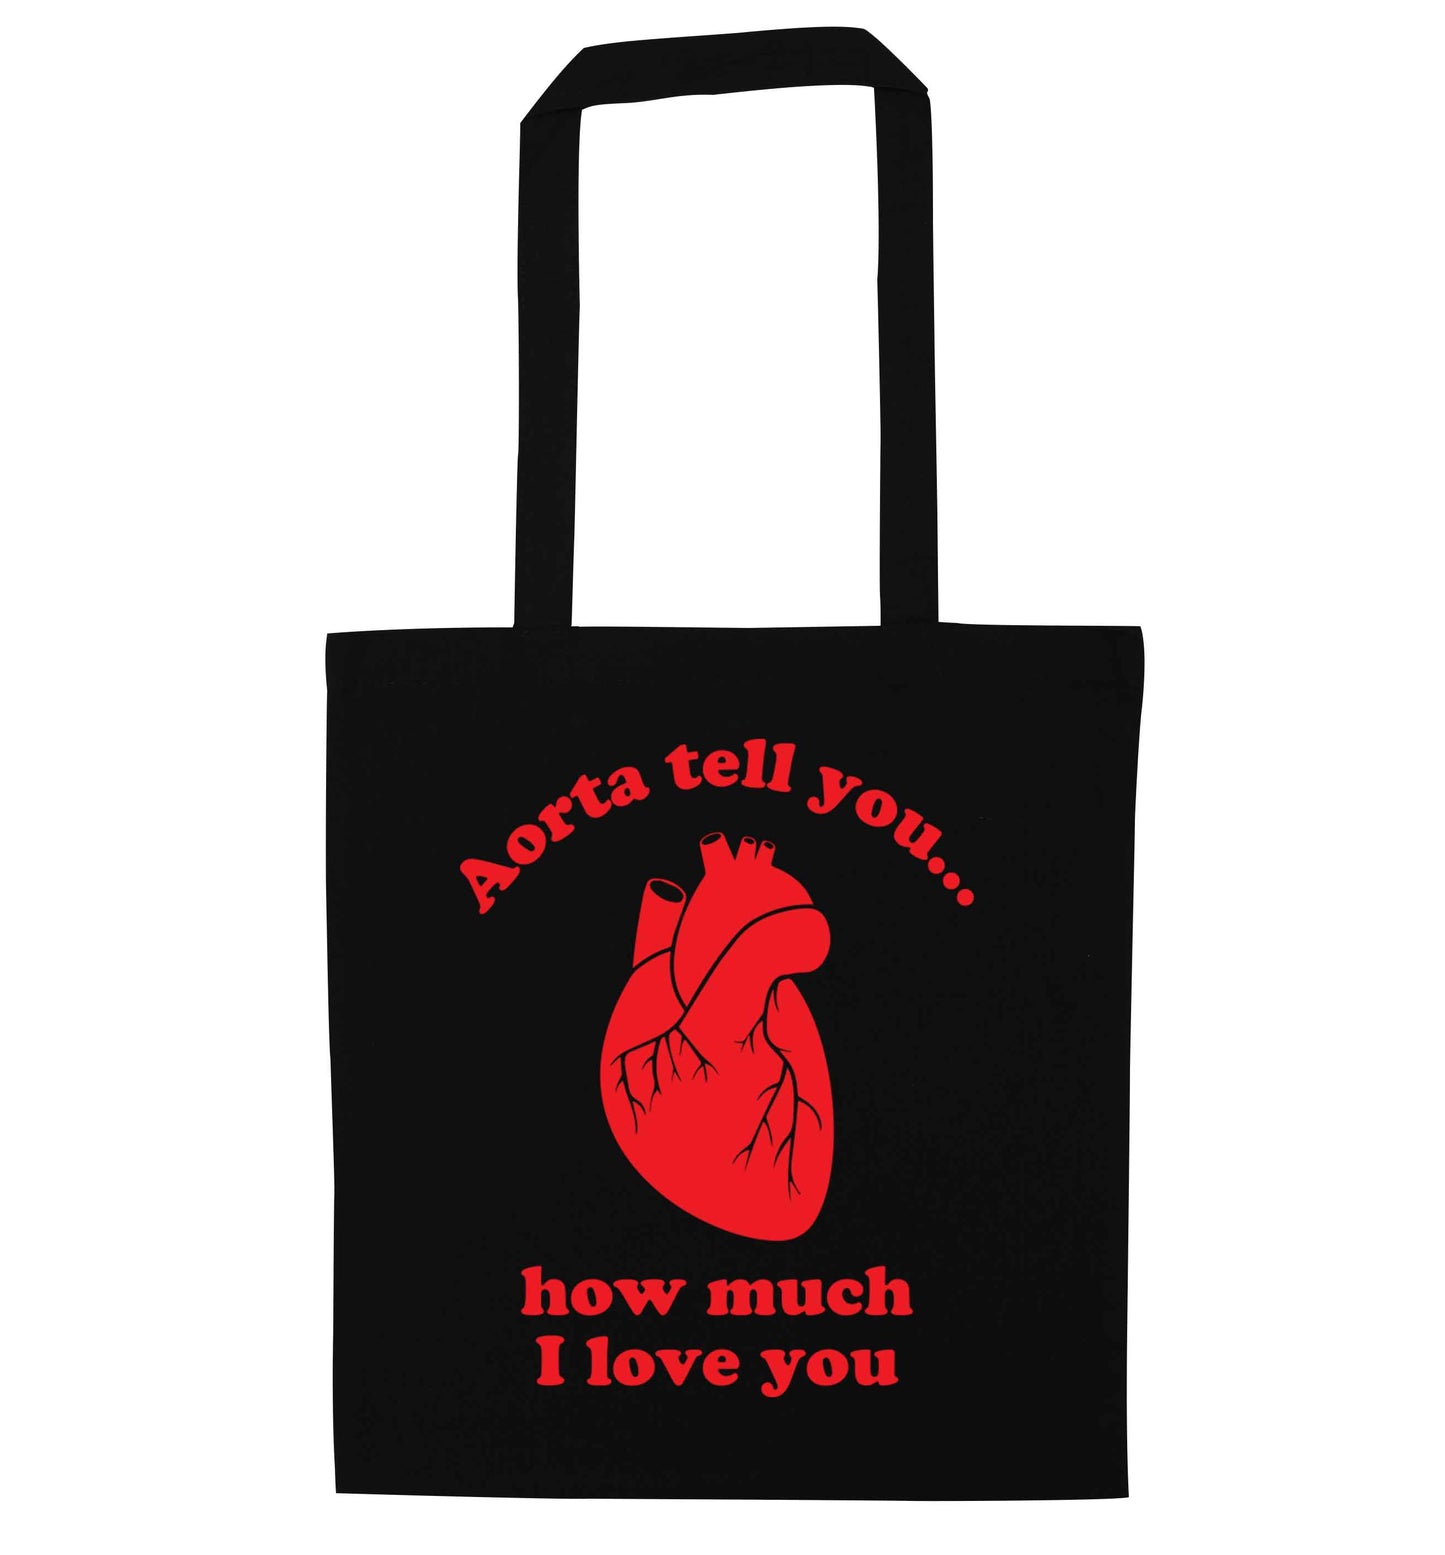 Aorta tell you how much I love you black tote bag